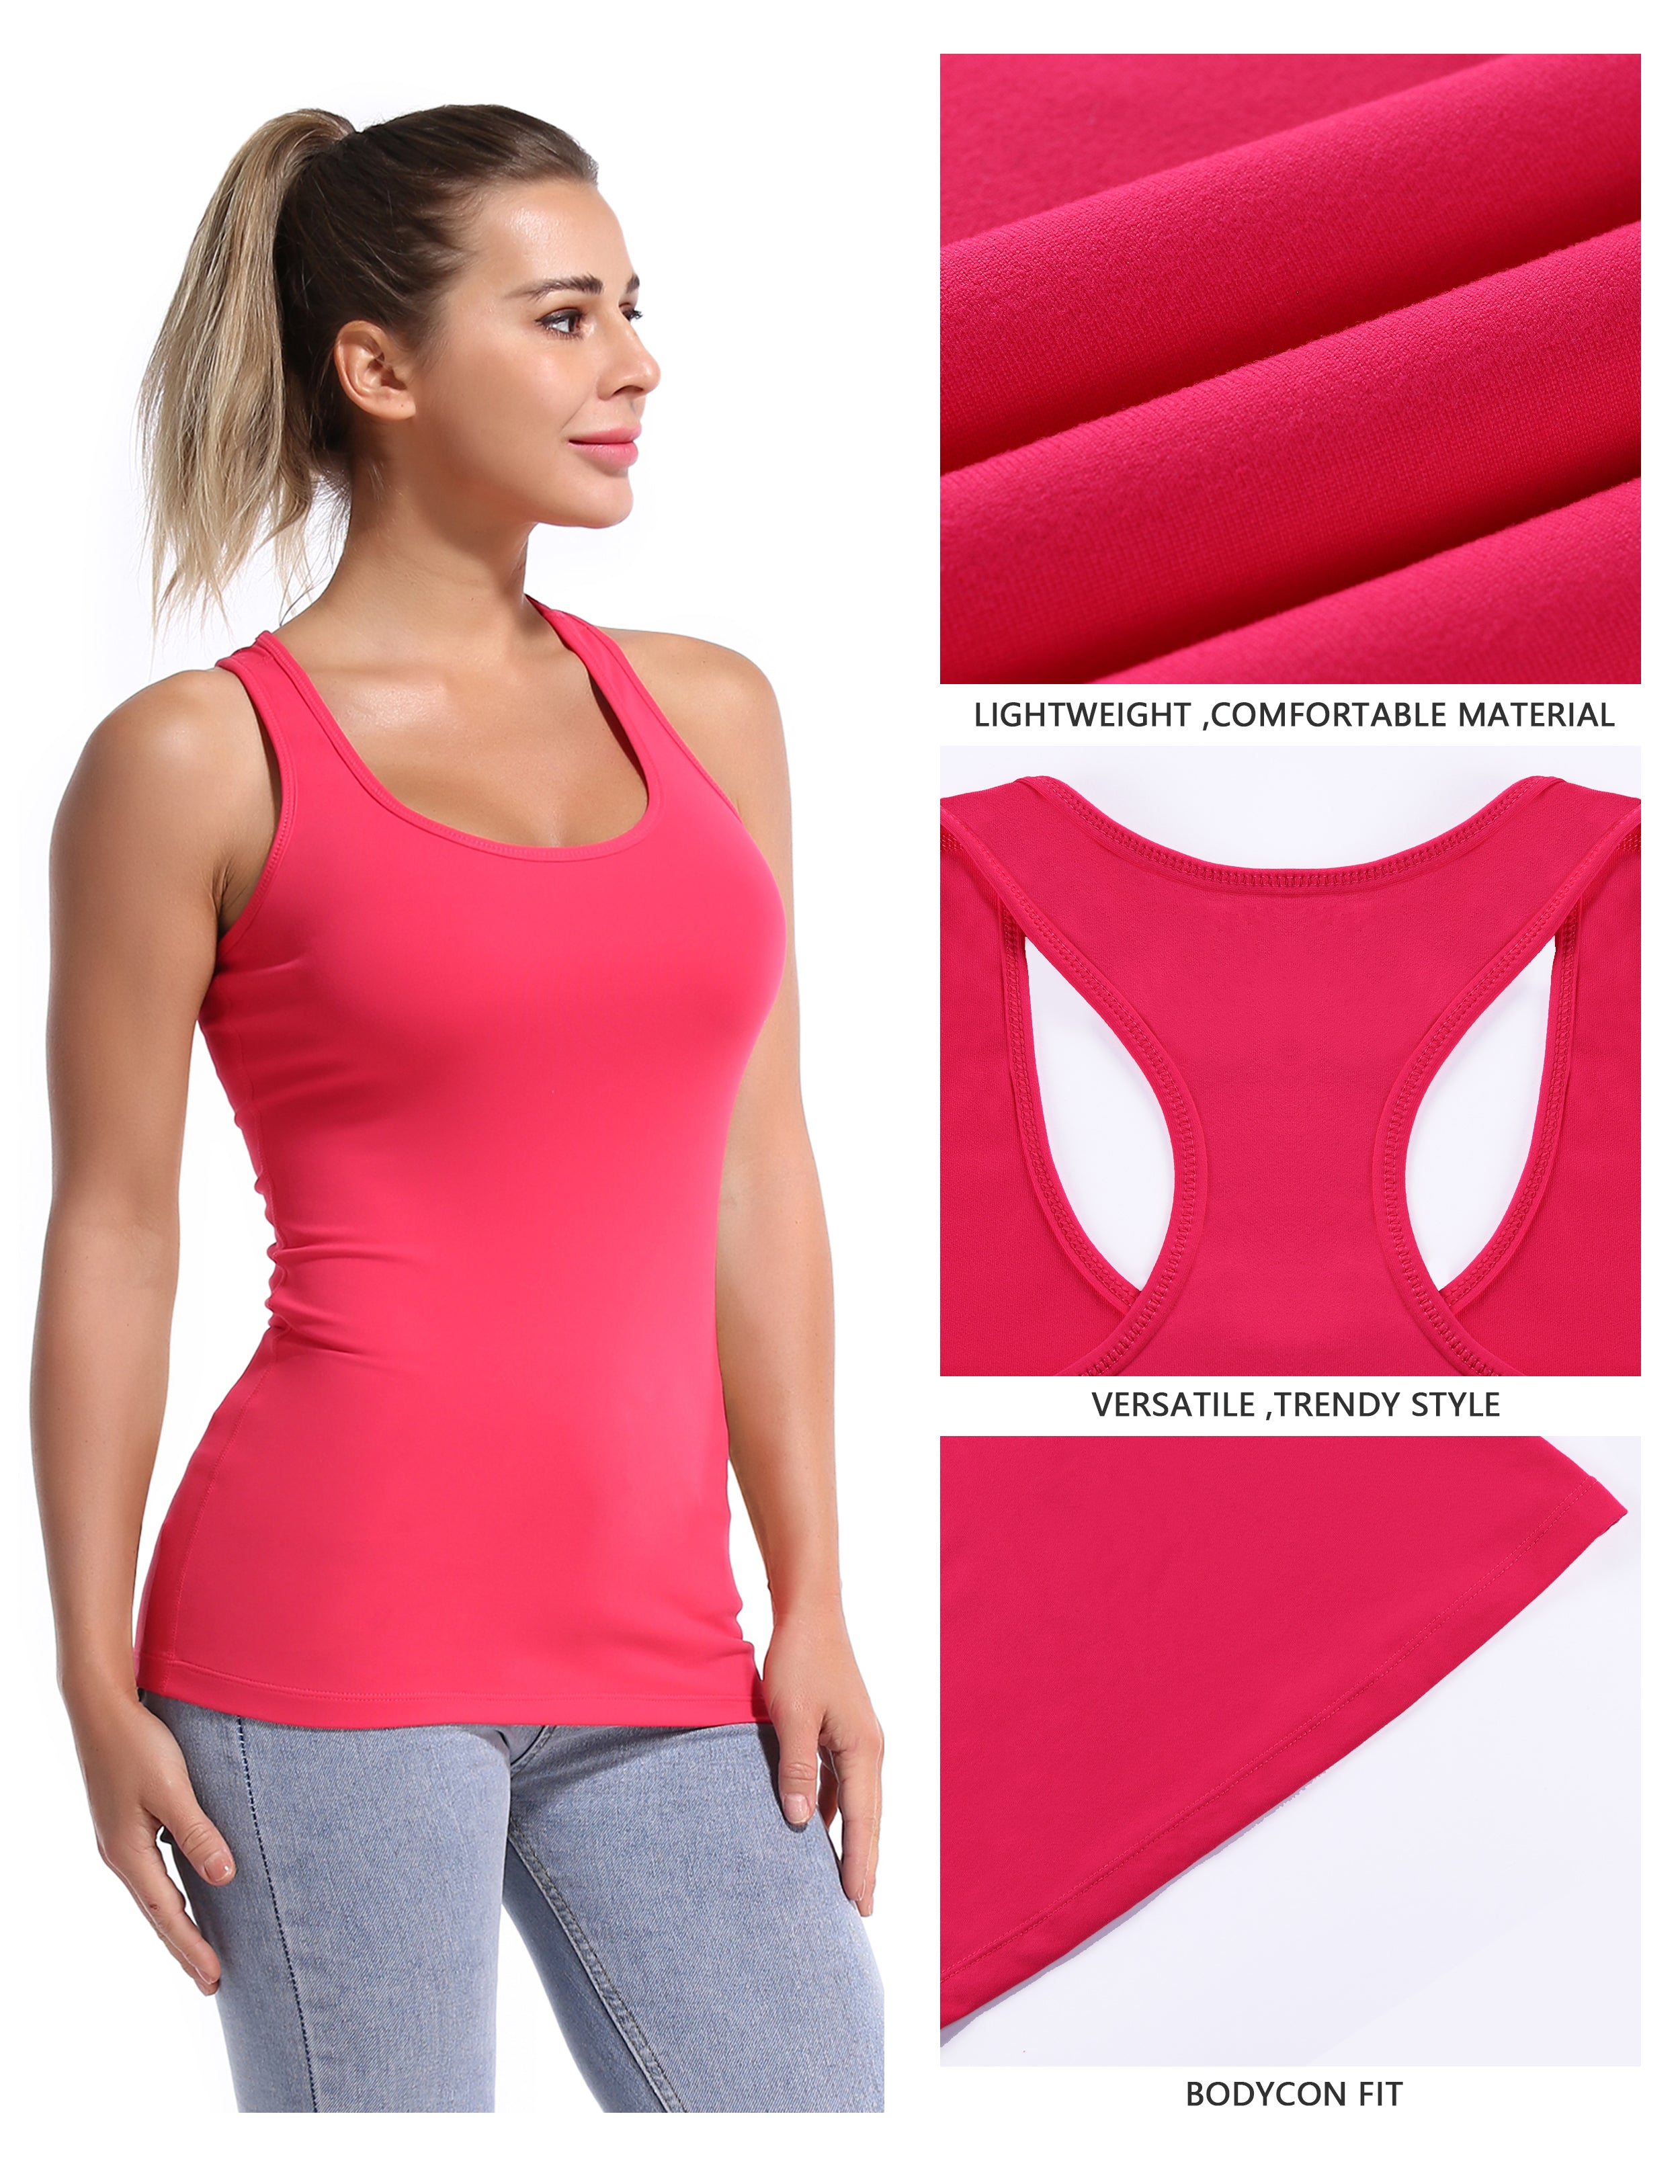 Racerback Athletic Tank Tops red 92%Nylon/8%Spandex(Cotton Soft) Designed for Golf Tight Fit So buttery soft, it feels weightless Sweat-wicking Four-way stretch Breathable Contours your body Sits below the waistband for moderate, everyday coverage